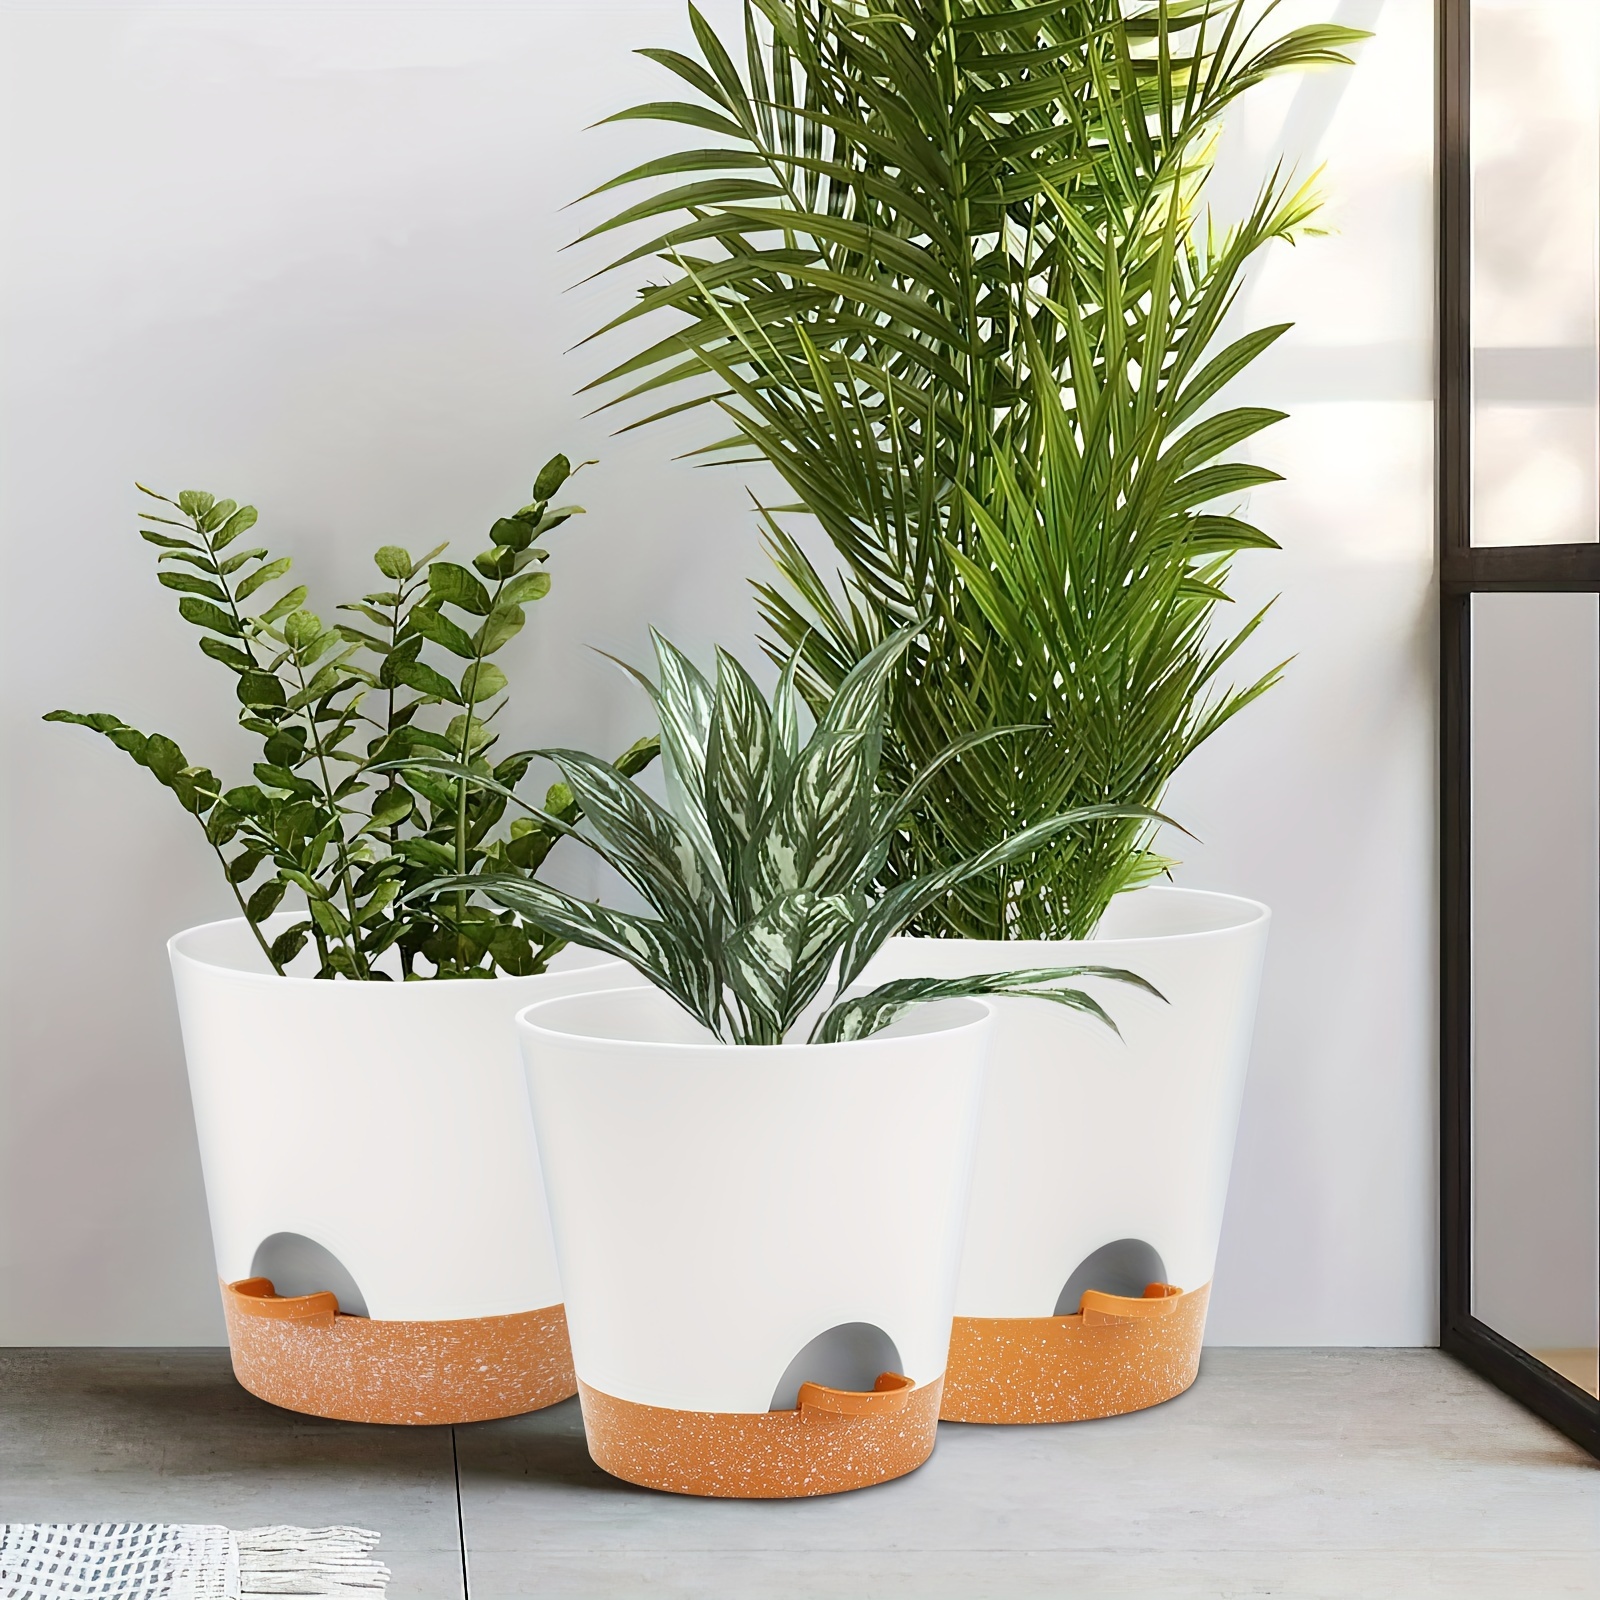 

3pcs, Plant Pots 10/9/8 Inch Self Watering Planters With Drainage Hole, Plastic Flower Pots, Nursery Planting Pot For All House Plants, Succulents, Snake Plant, African Violet, Flowers